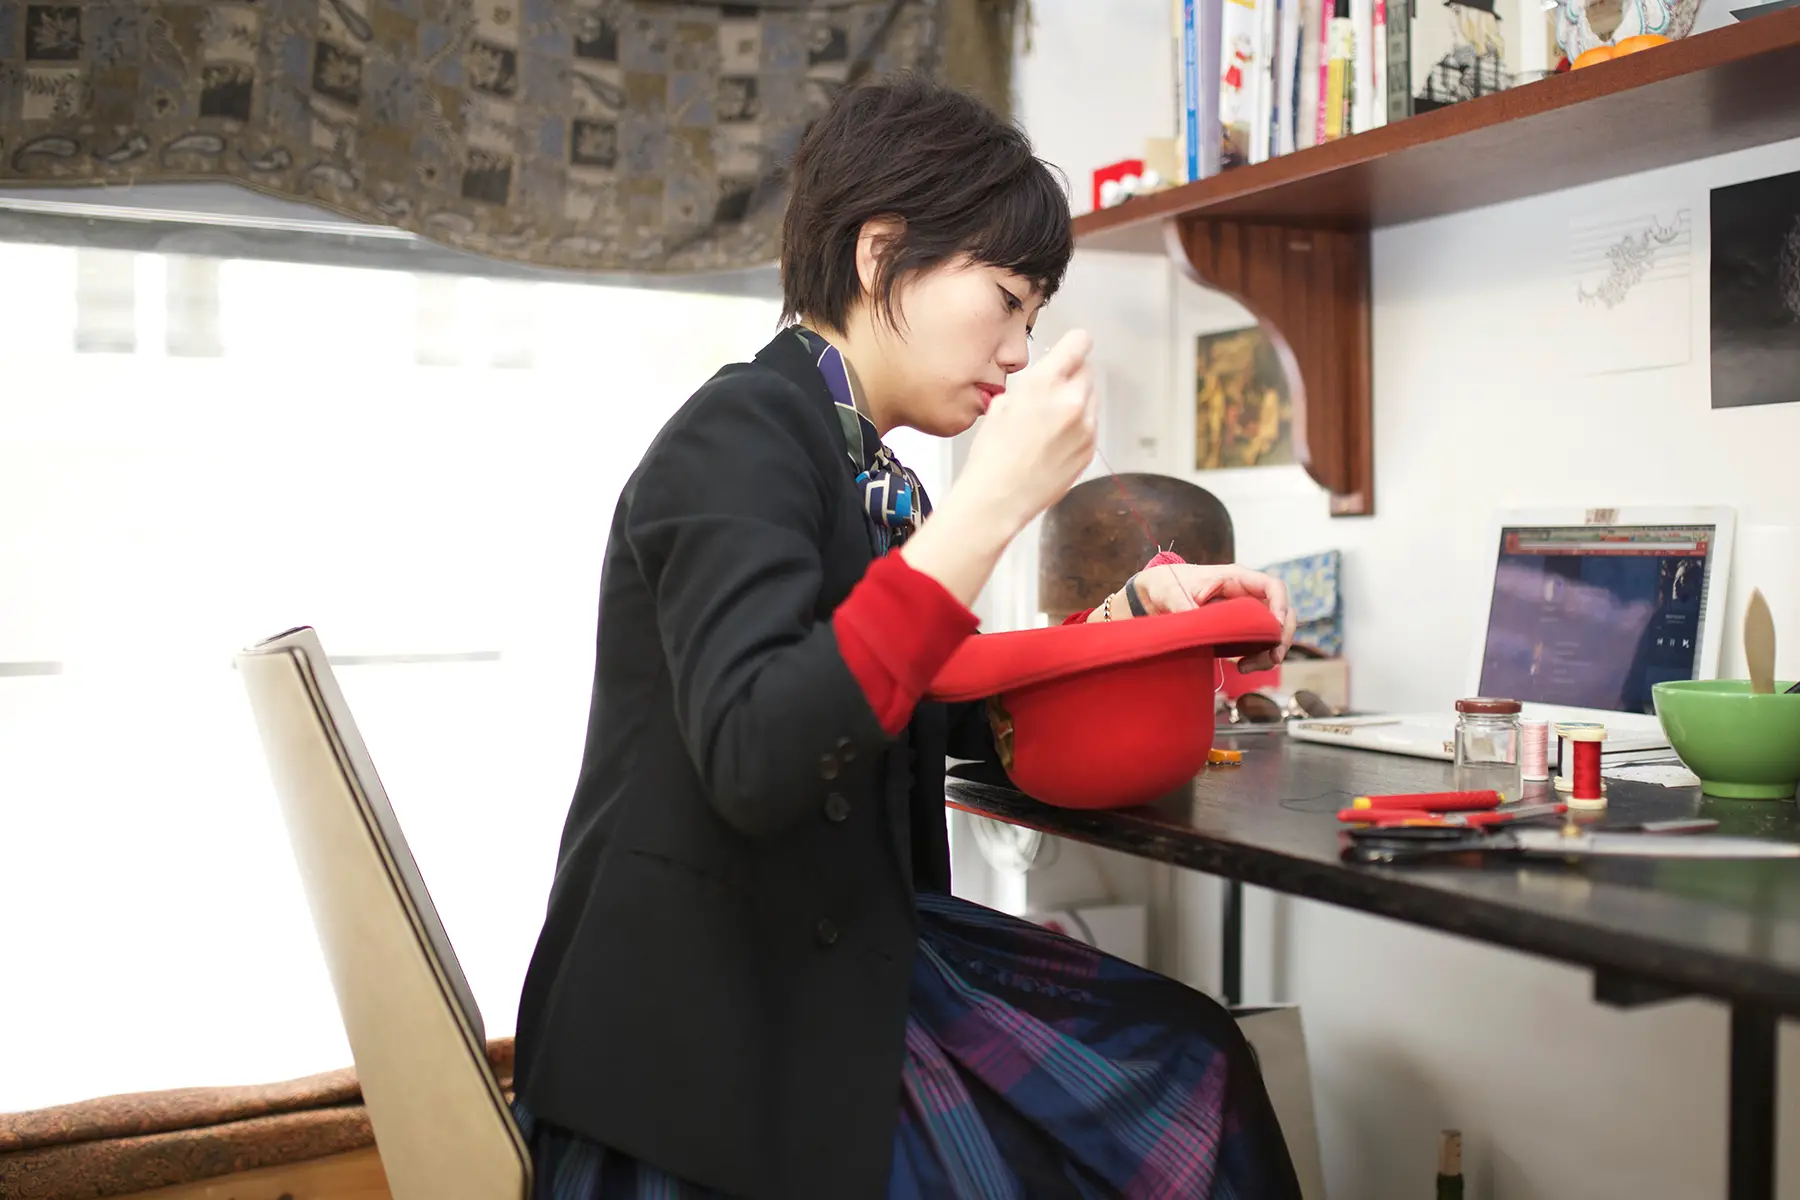 A woman making a hat at a desk